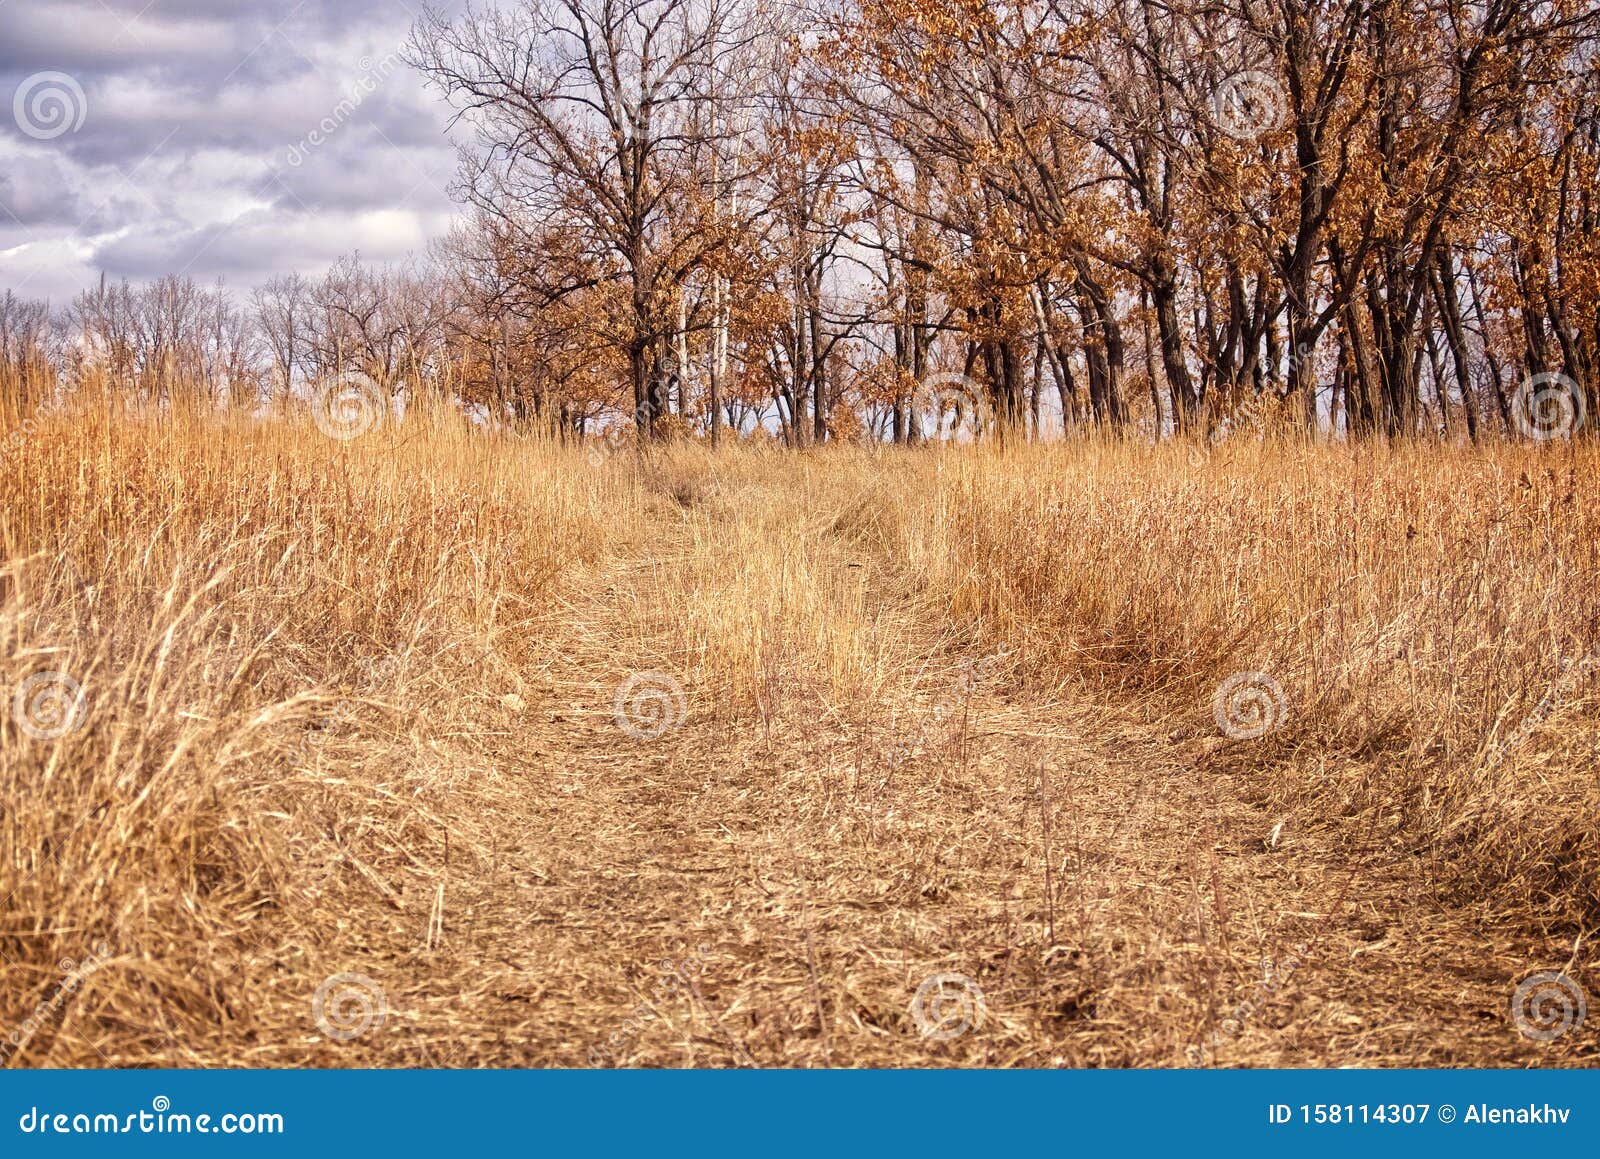 Forest Road through Yellow Grass Against a Background of Beautiful Grey  Clouds Stock Image - Image of foliage, nature: 158114307